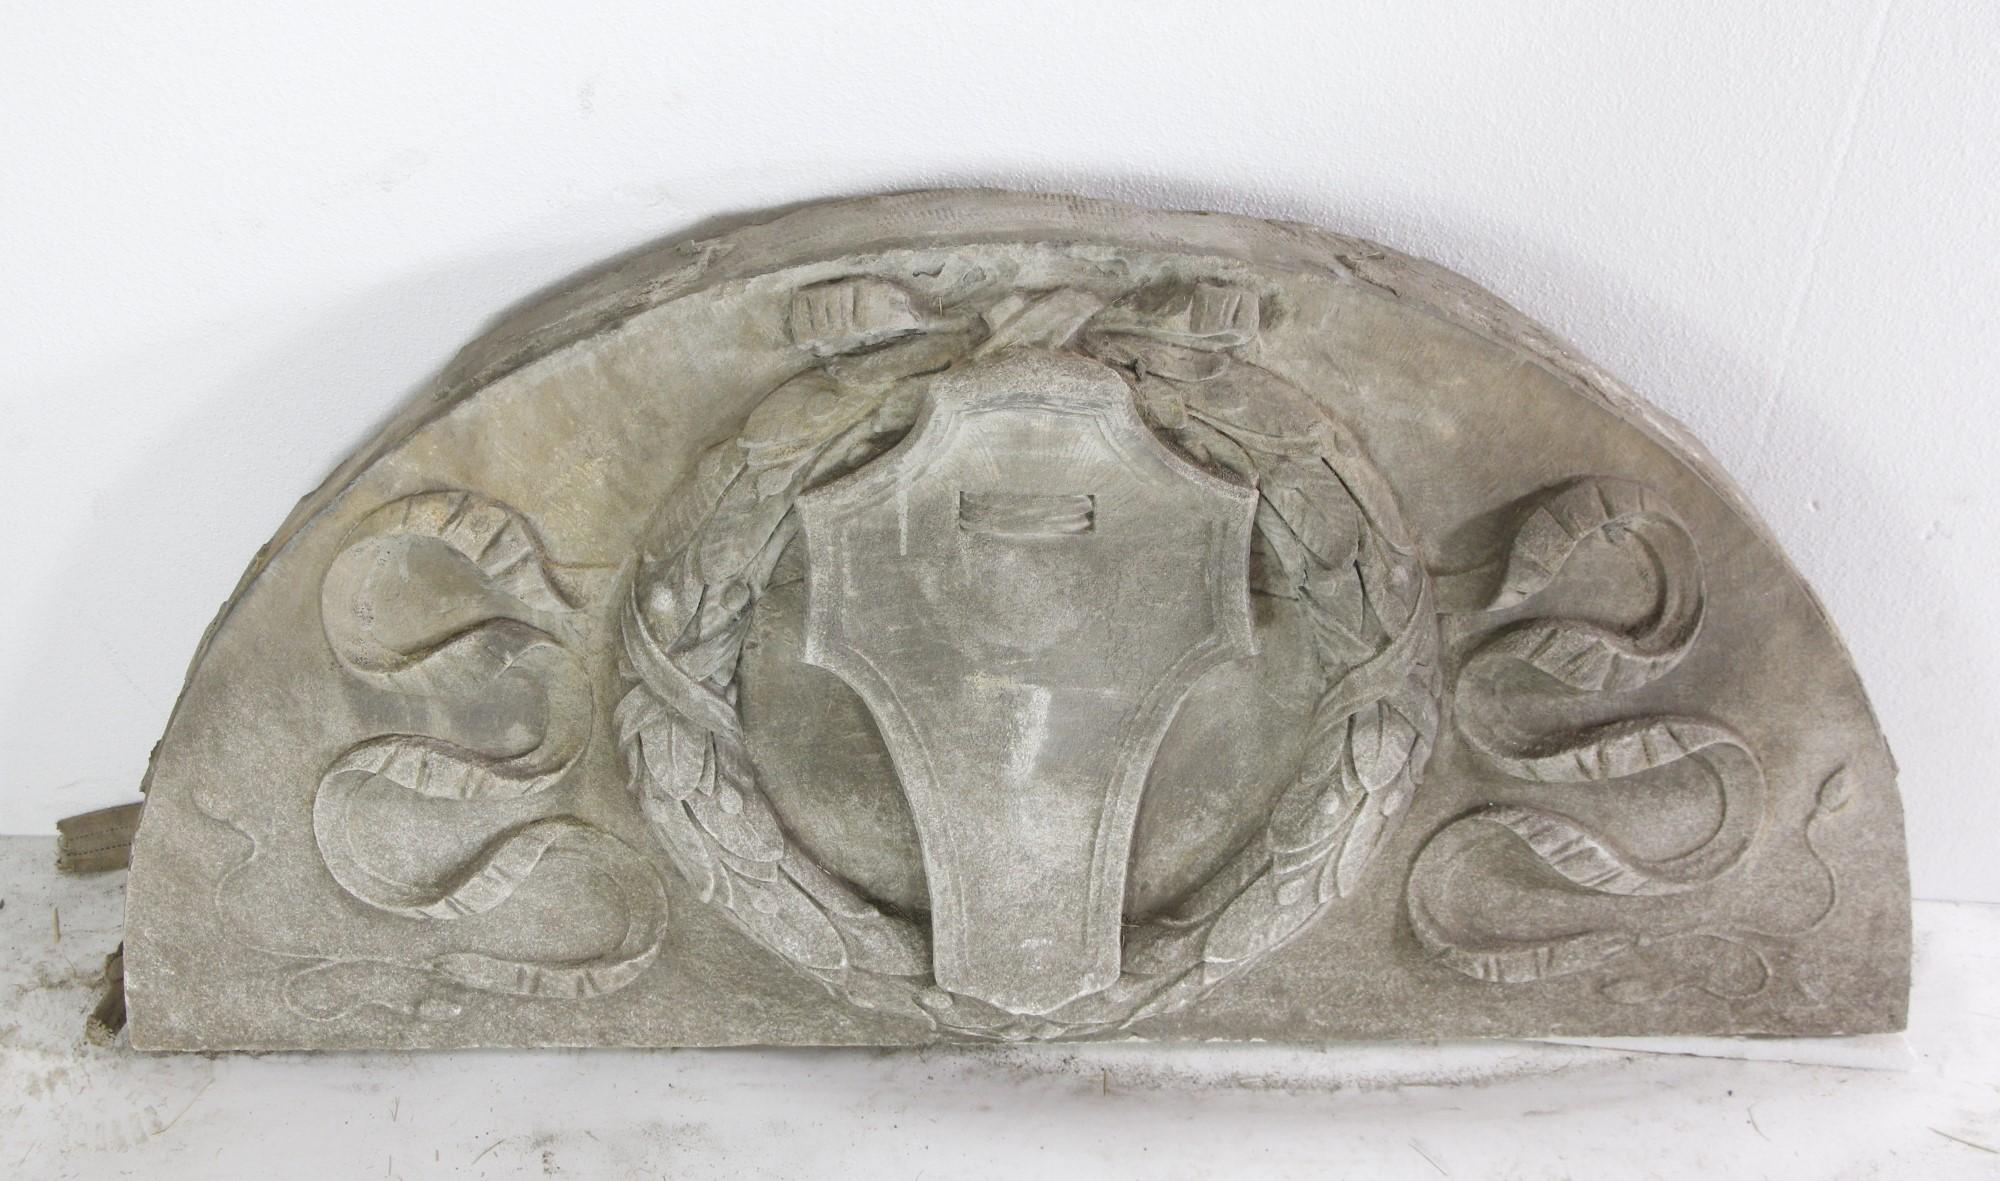 Late 19th century arched limestone transom pediment featuring a hand carved center shield and wreath, with ribbons fluttering out breezily on each side. This can be seen at our 400 Gilligan St location in Scranton, PA.